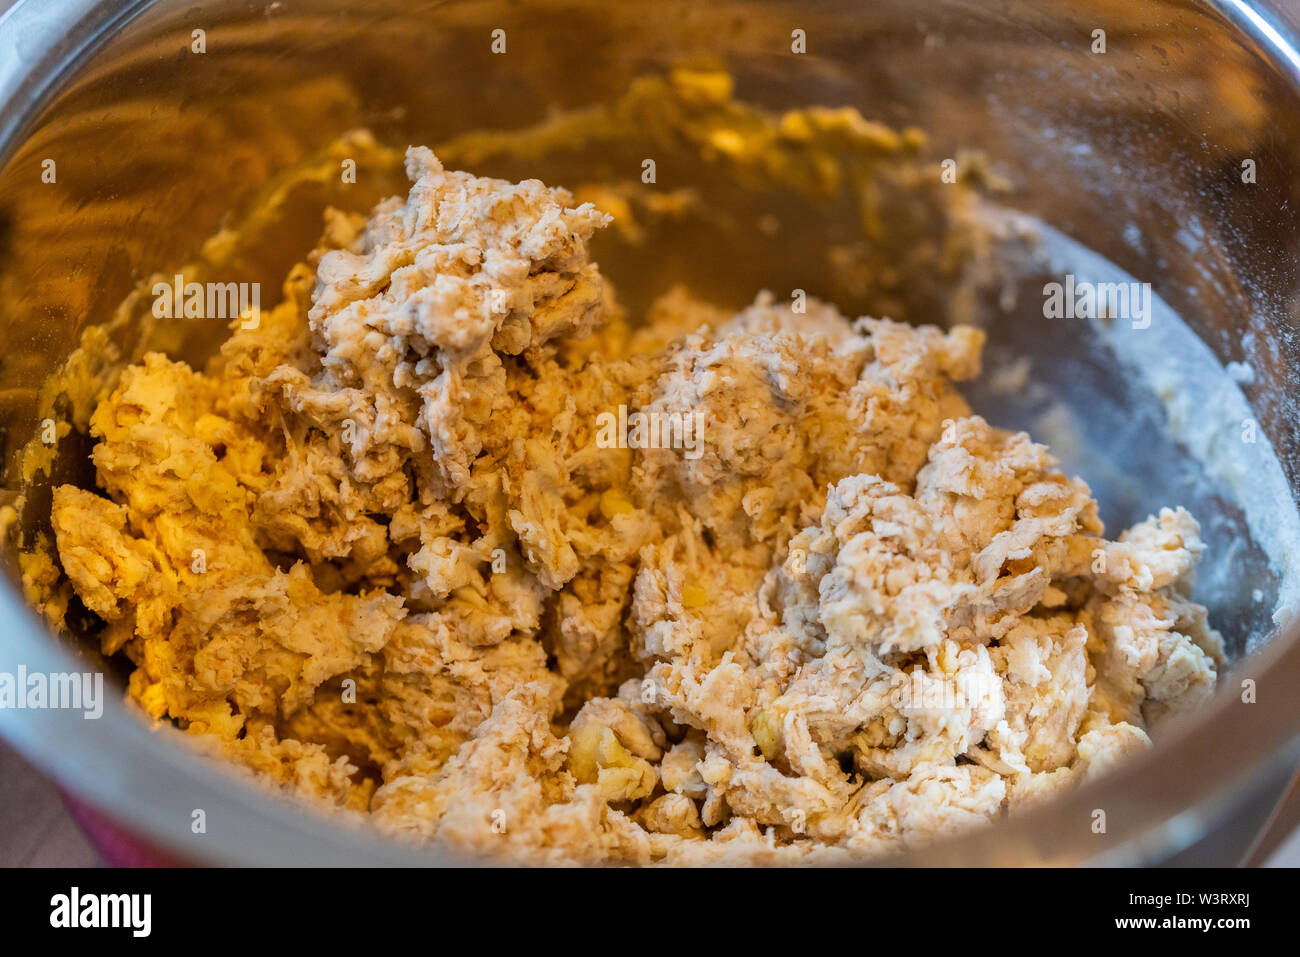 Bowl of pastries for fresh delicious pizza dough Stock Photo